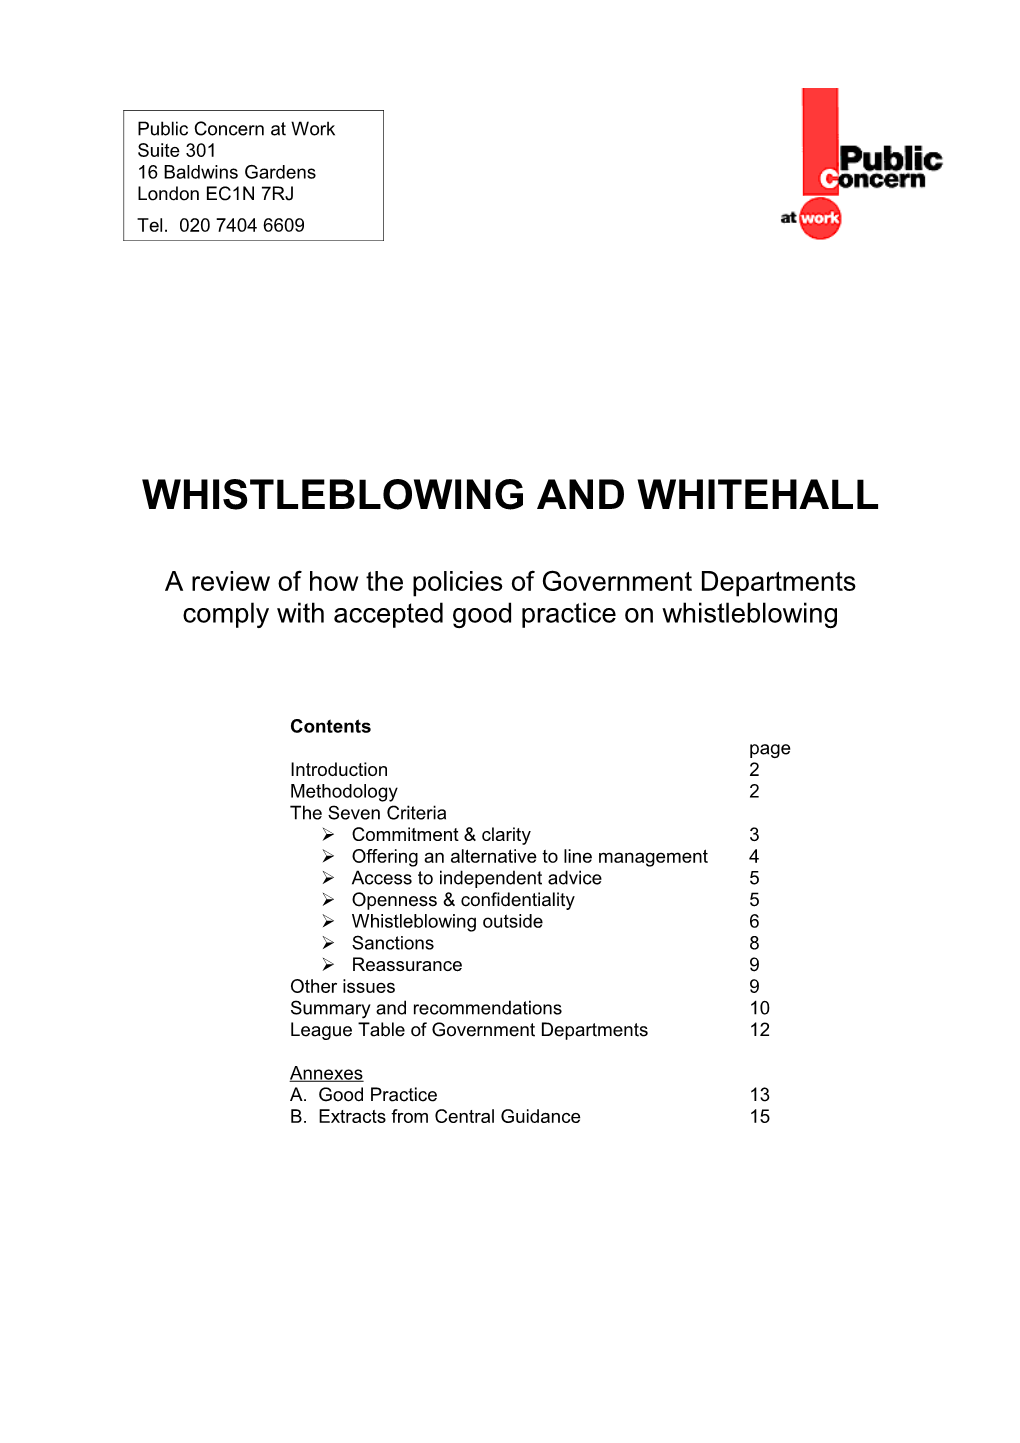 Whistleblowing and Whitehall